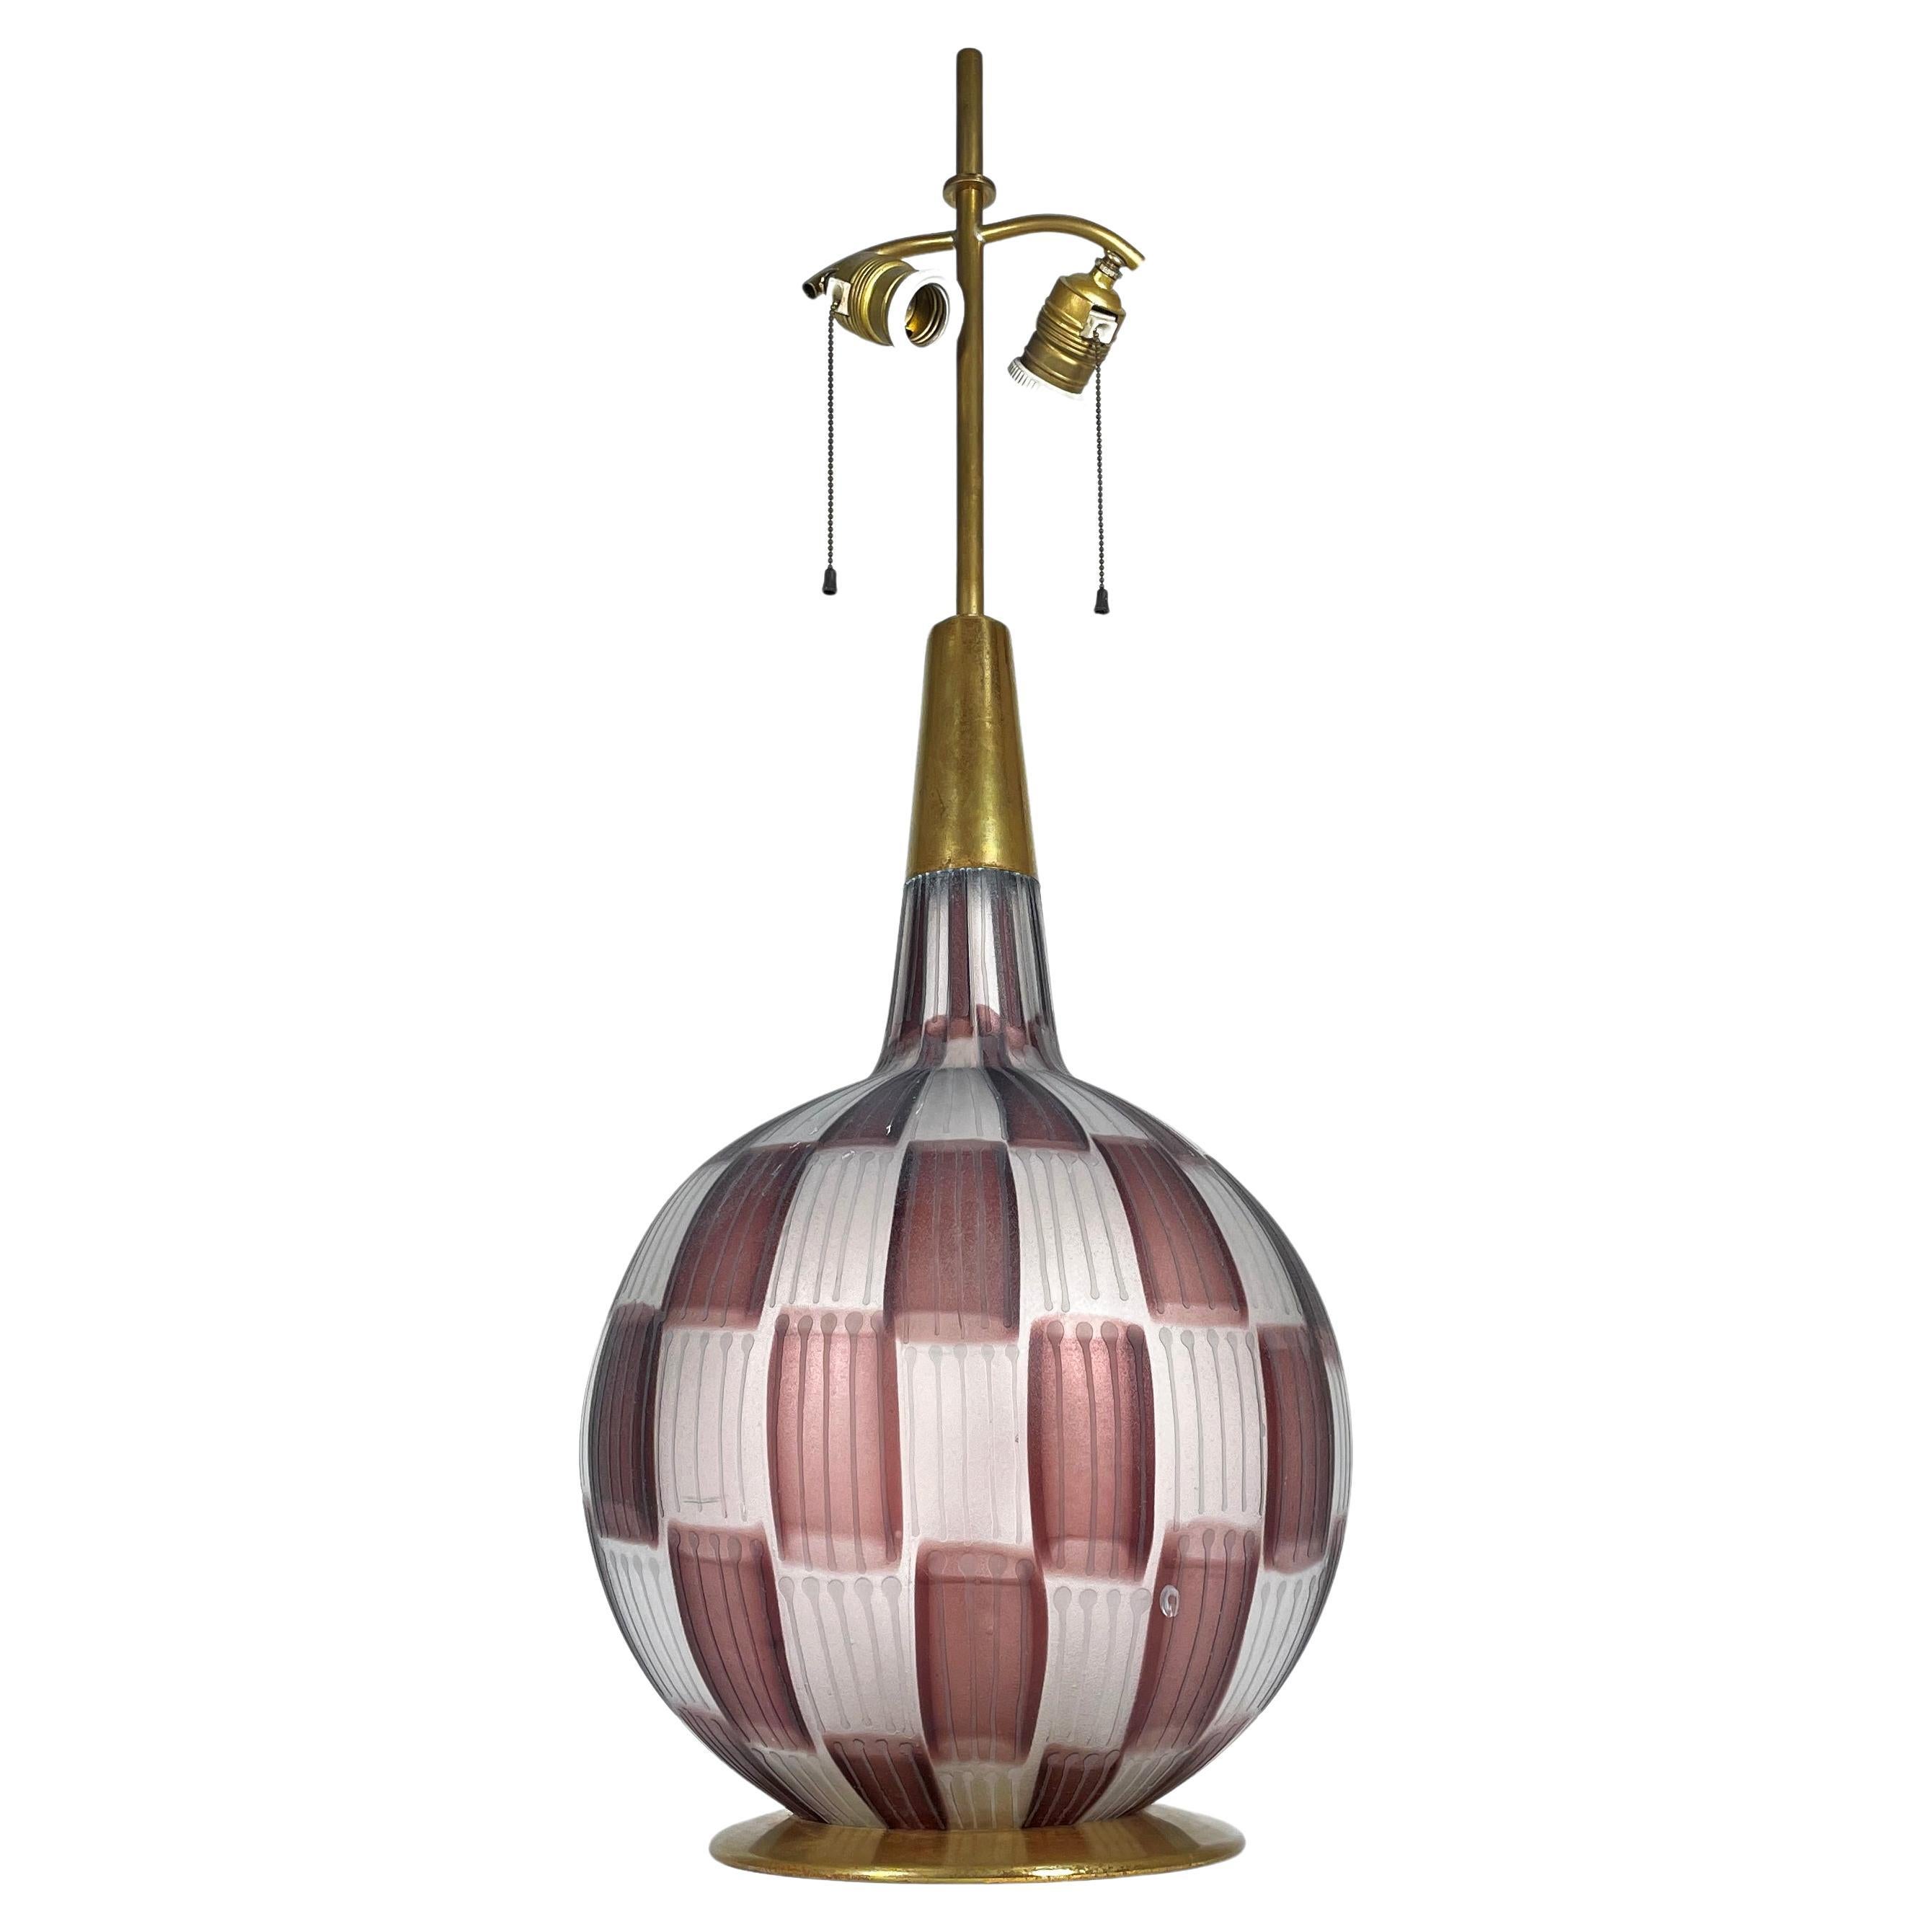 Stunning Large Pezzato Murano Glass Table Lamp by Barovier for Stilnovo, Italy